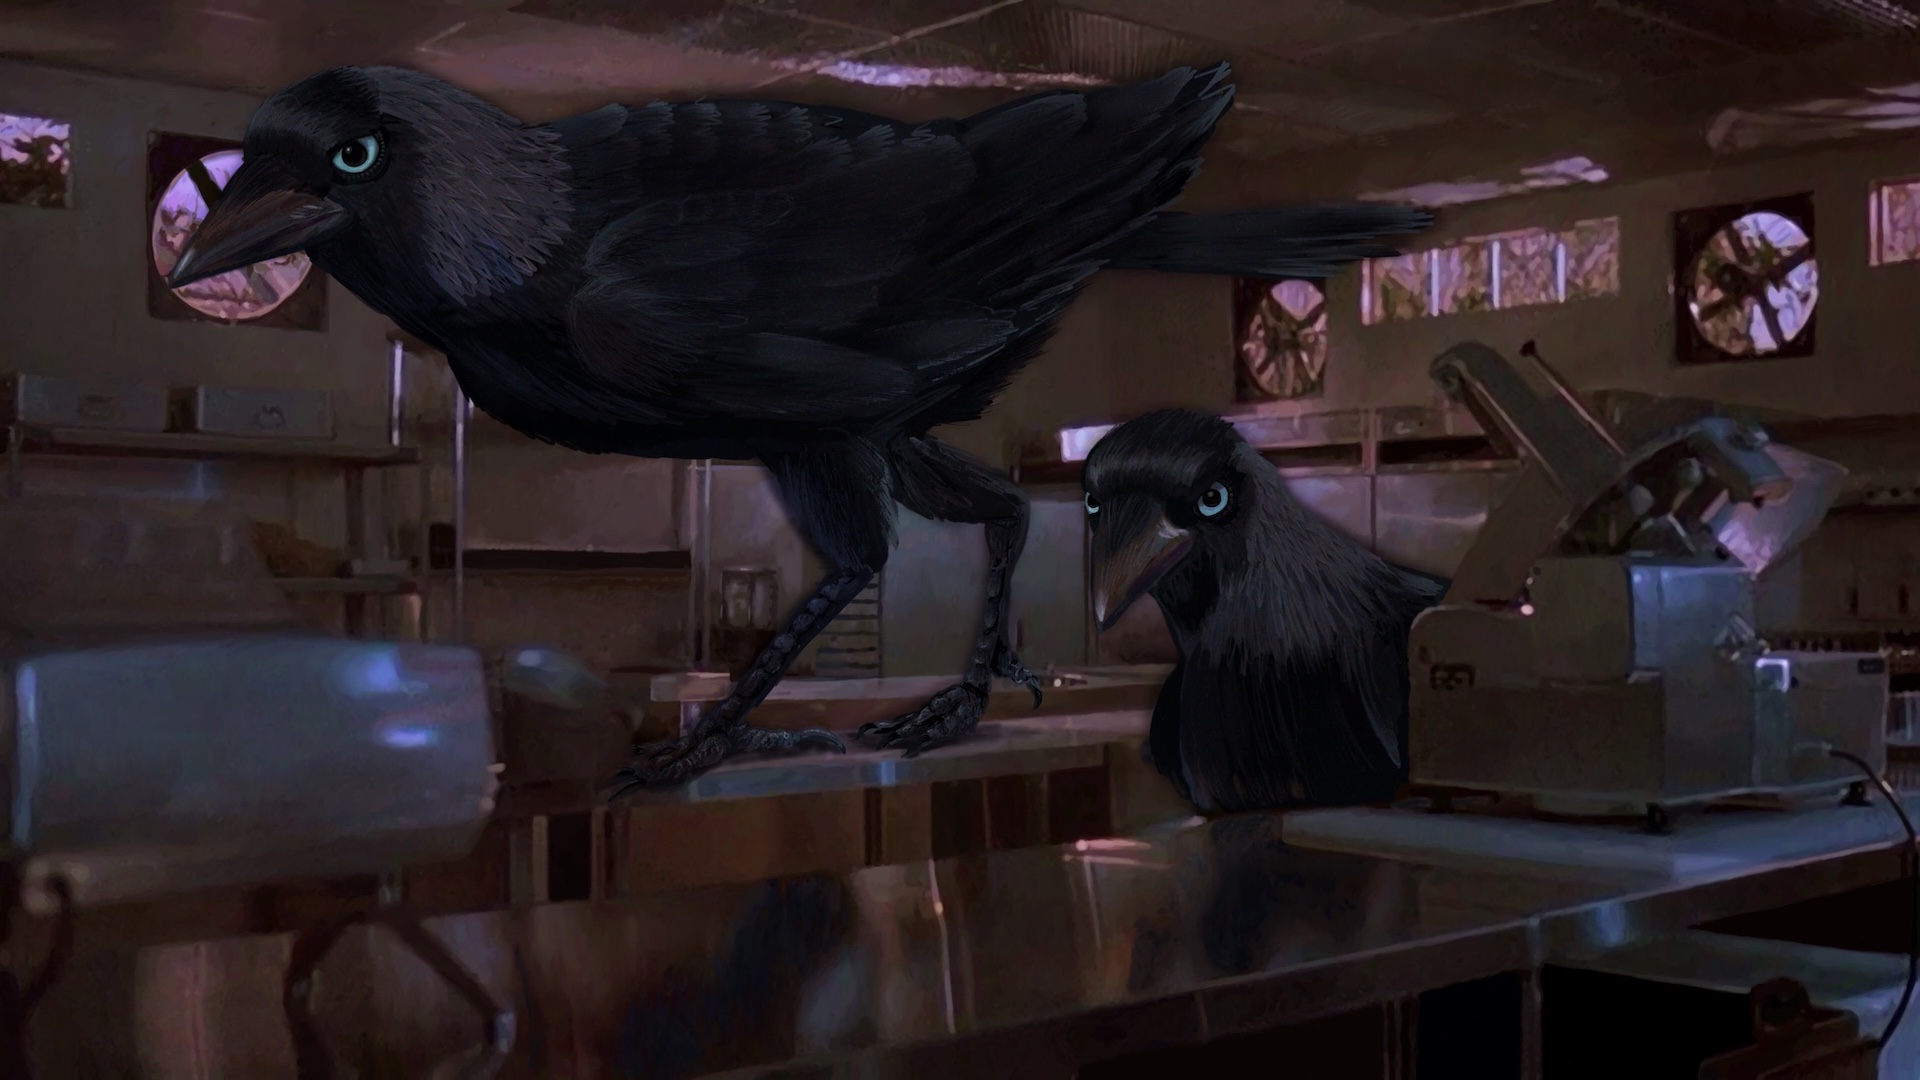 Digitally painted reproduction of of a frame from Jurassic Park, but instead of velociraptors in the kitchen, it's giant jackdaws.'